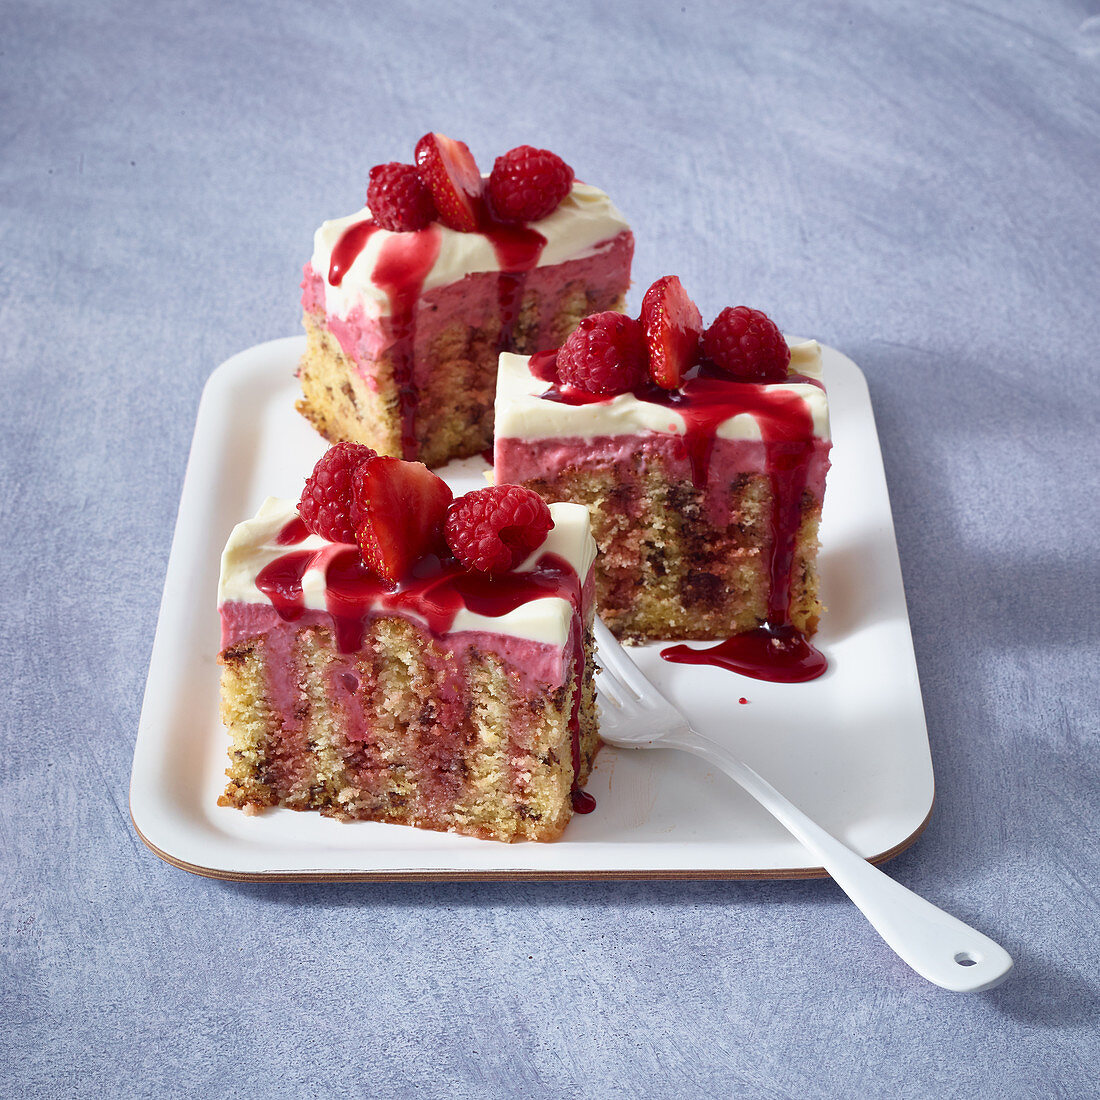 Buttermilk and berry poke cake